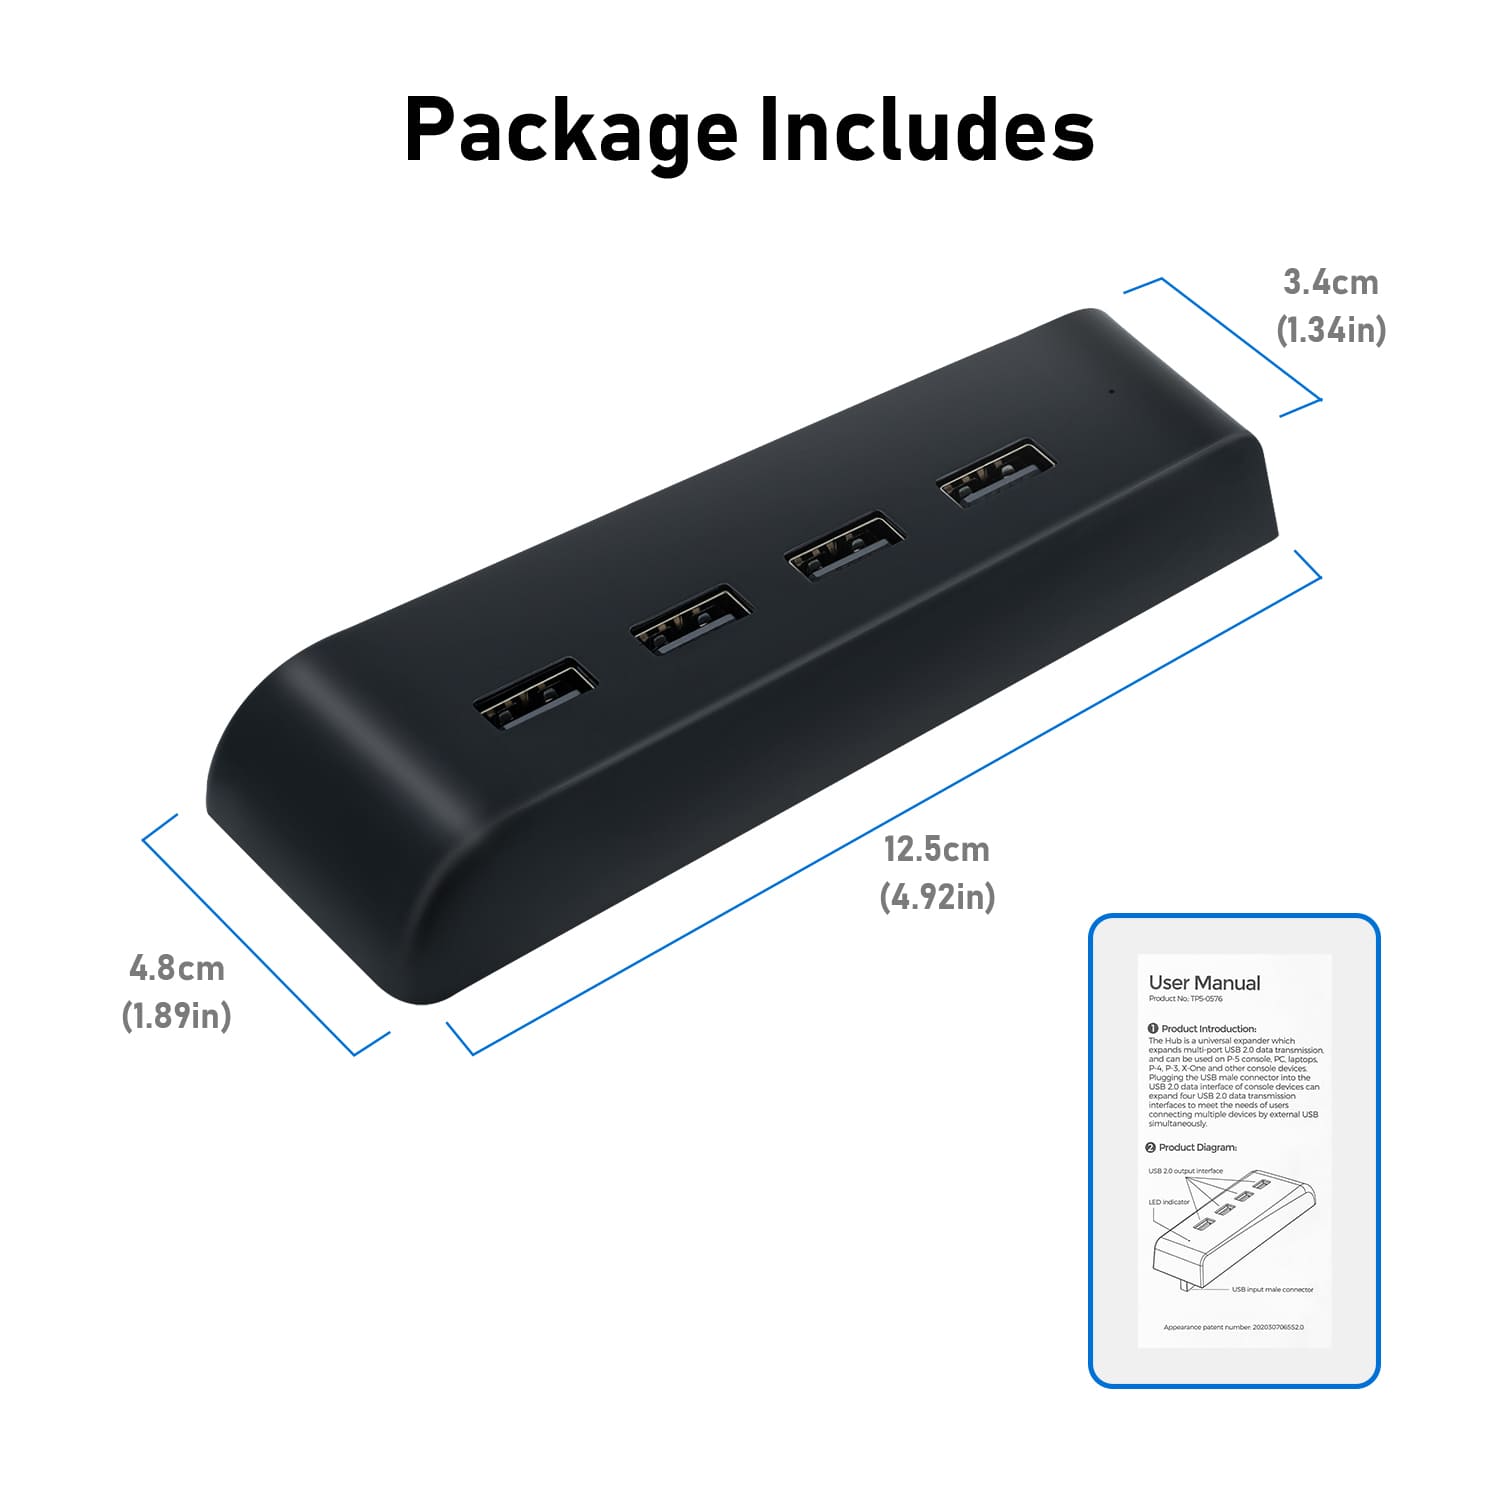  Dobe 2 to 5 USB HUB for PS4 System : Video Games